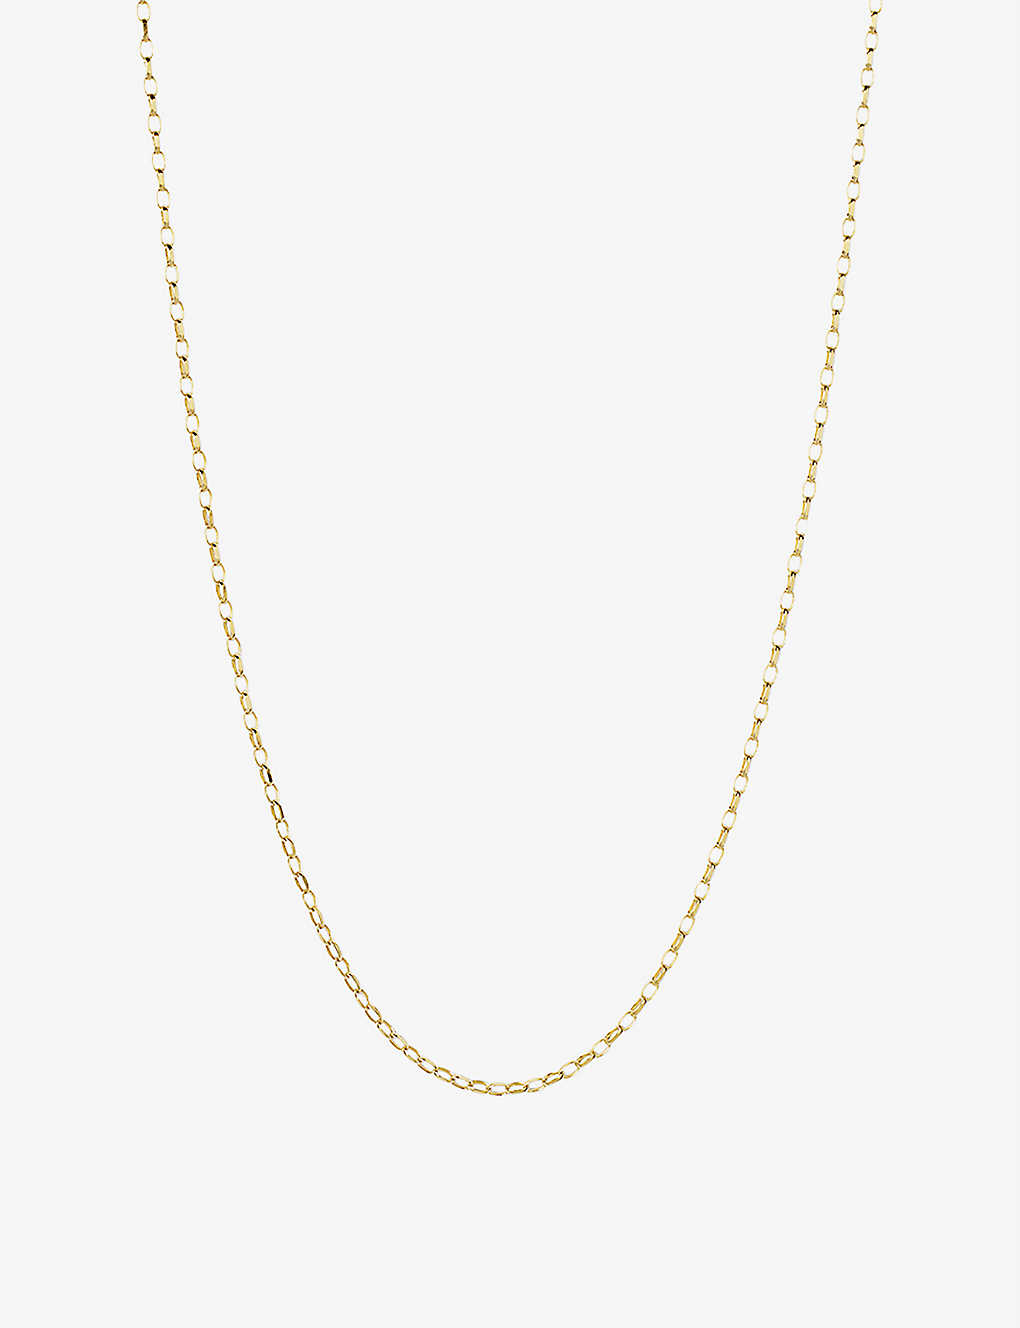 The Alkemistry 18ct Yellow Gold Cable Chain Necklace